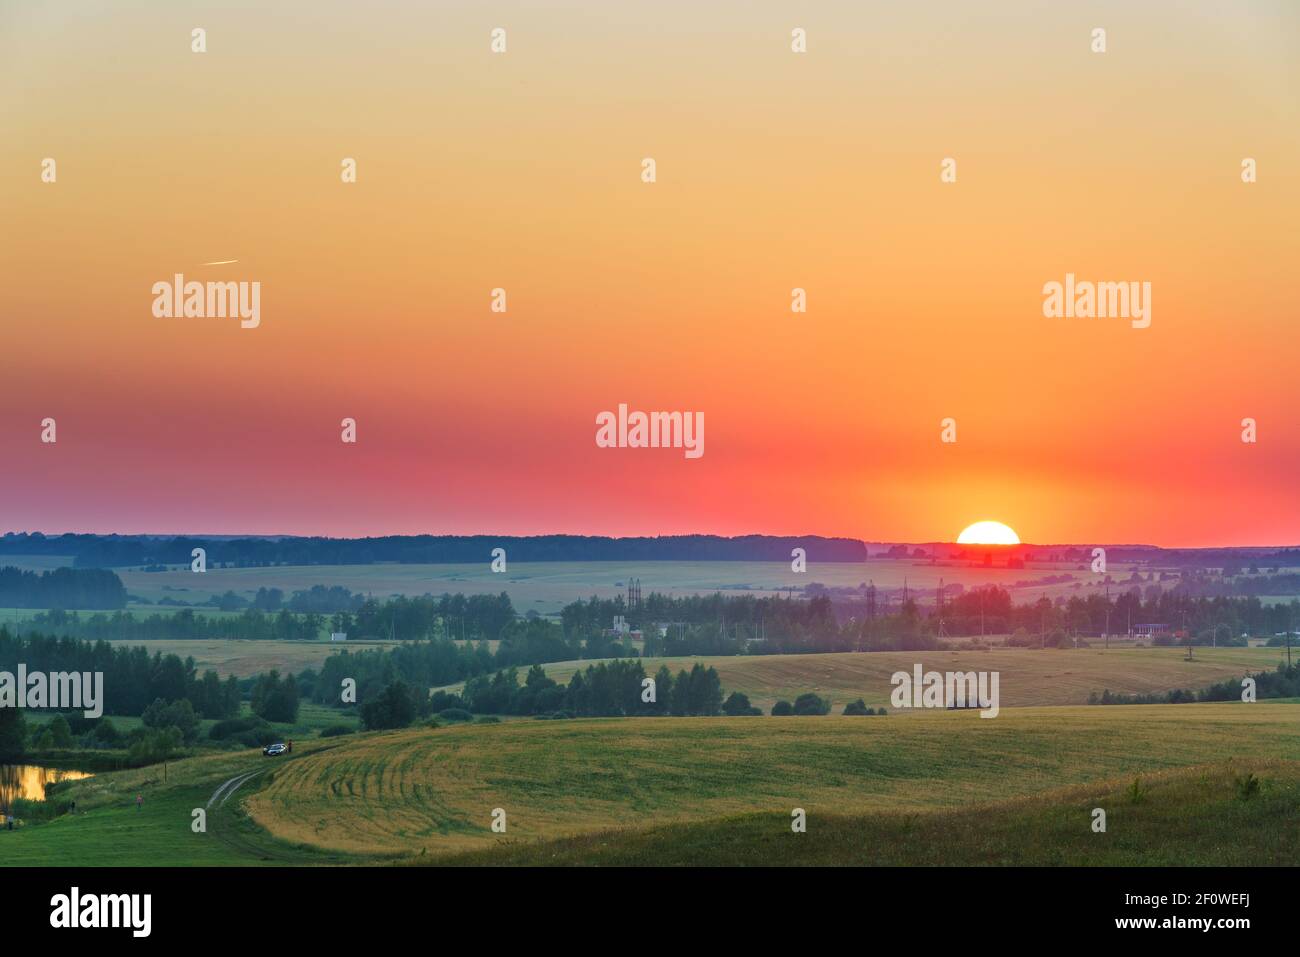 Vibrant sunset in russian countryside Stock Photo